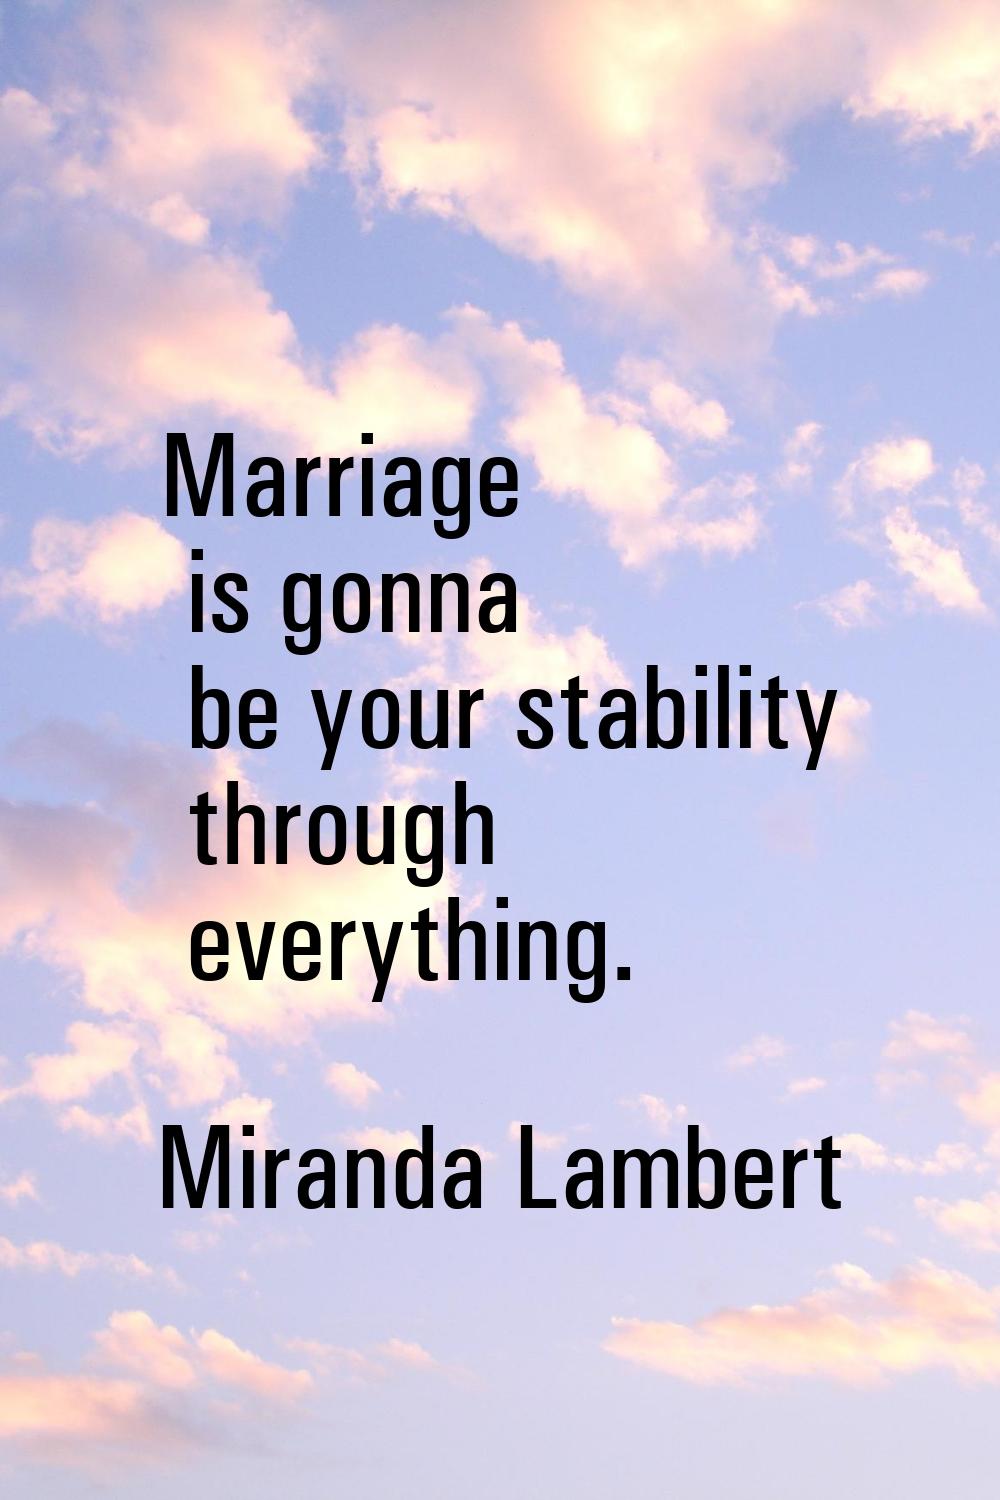 Marriage is gonna be your stability through everything.